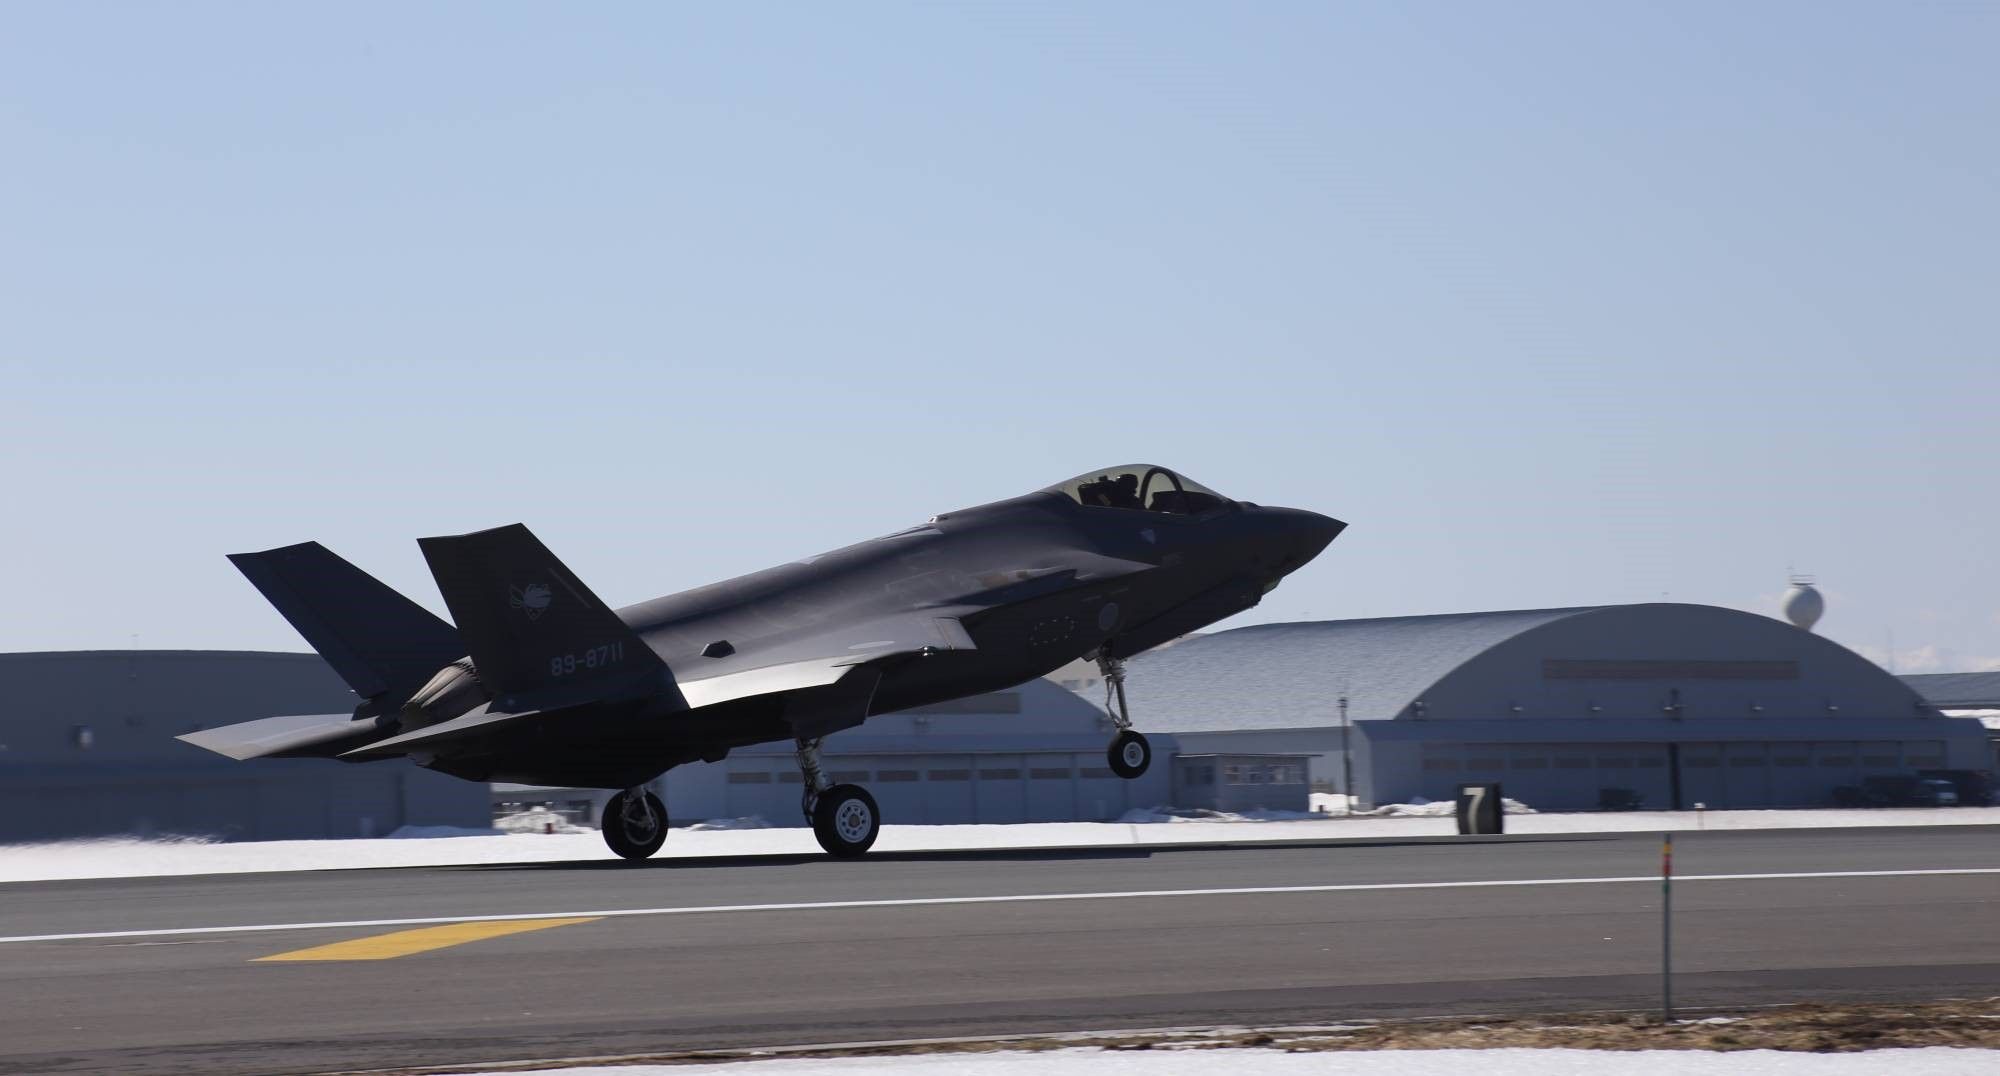 Japan and the U.S. Hold F-35 Stealth Fighter Joint Drill For the First Time